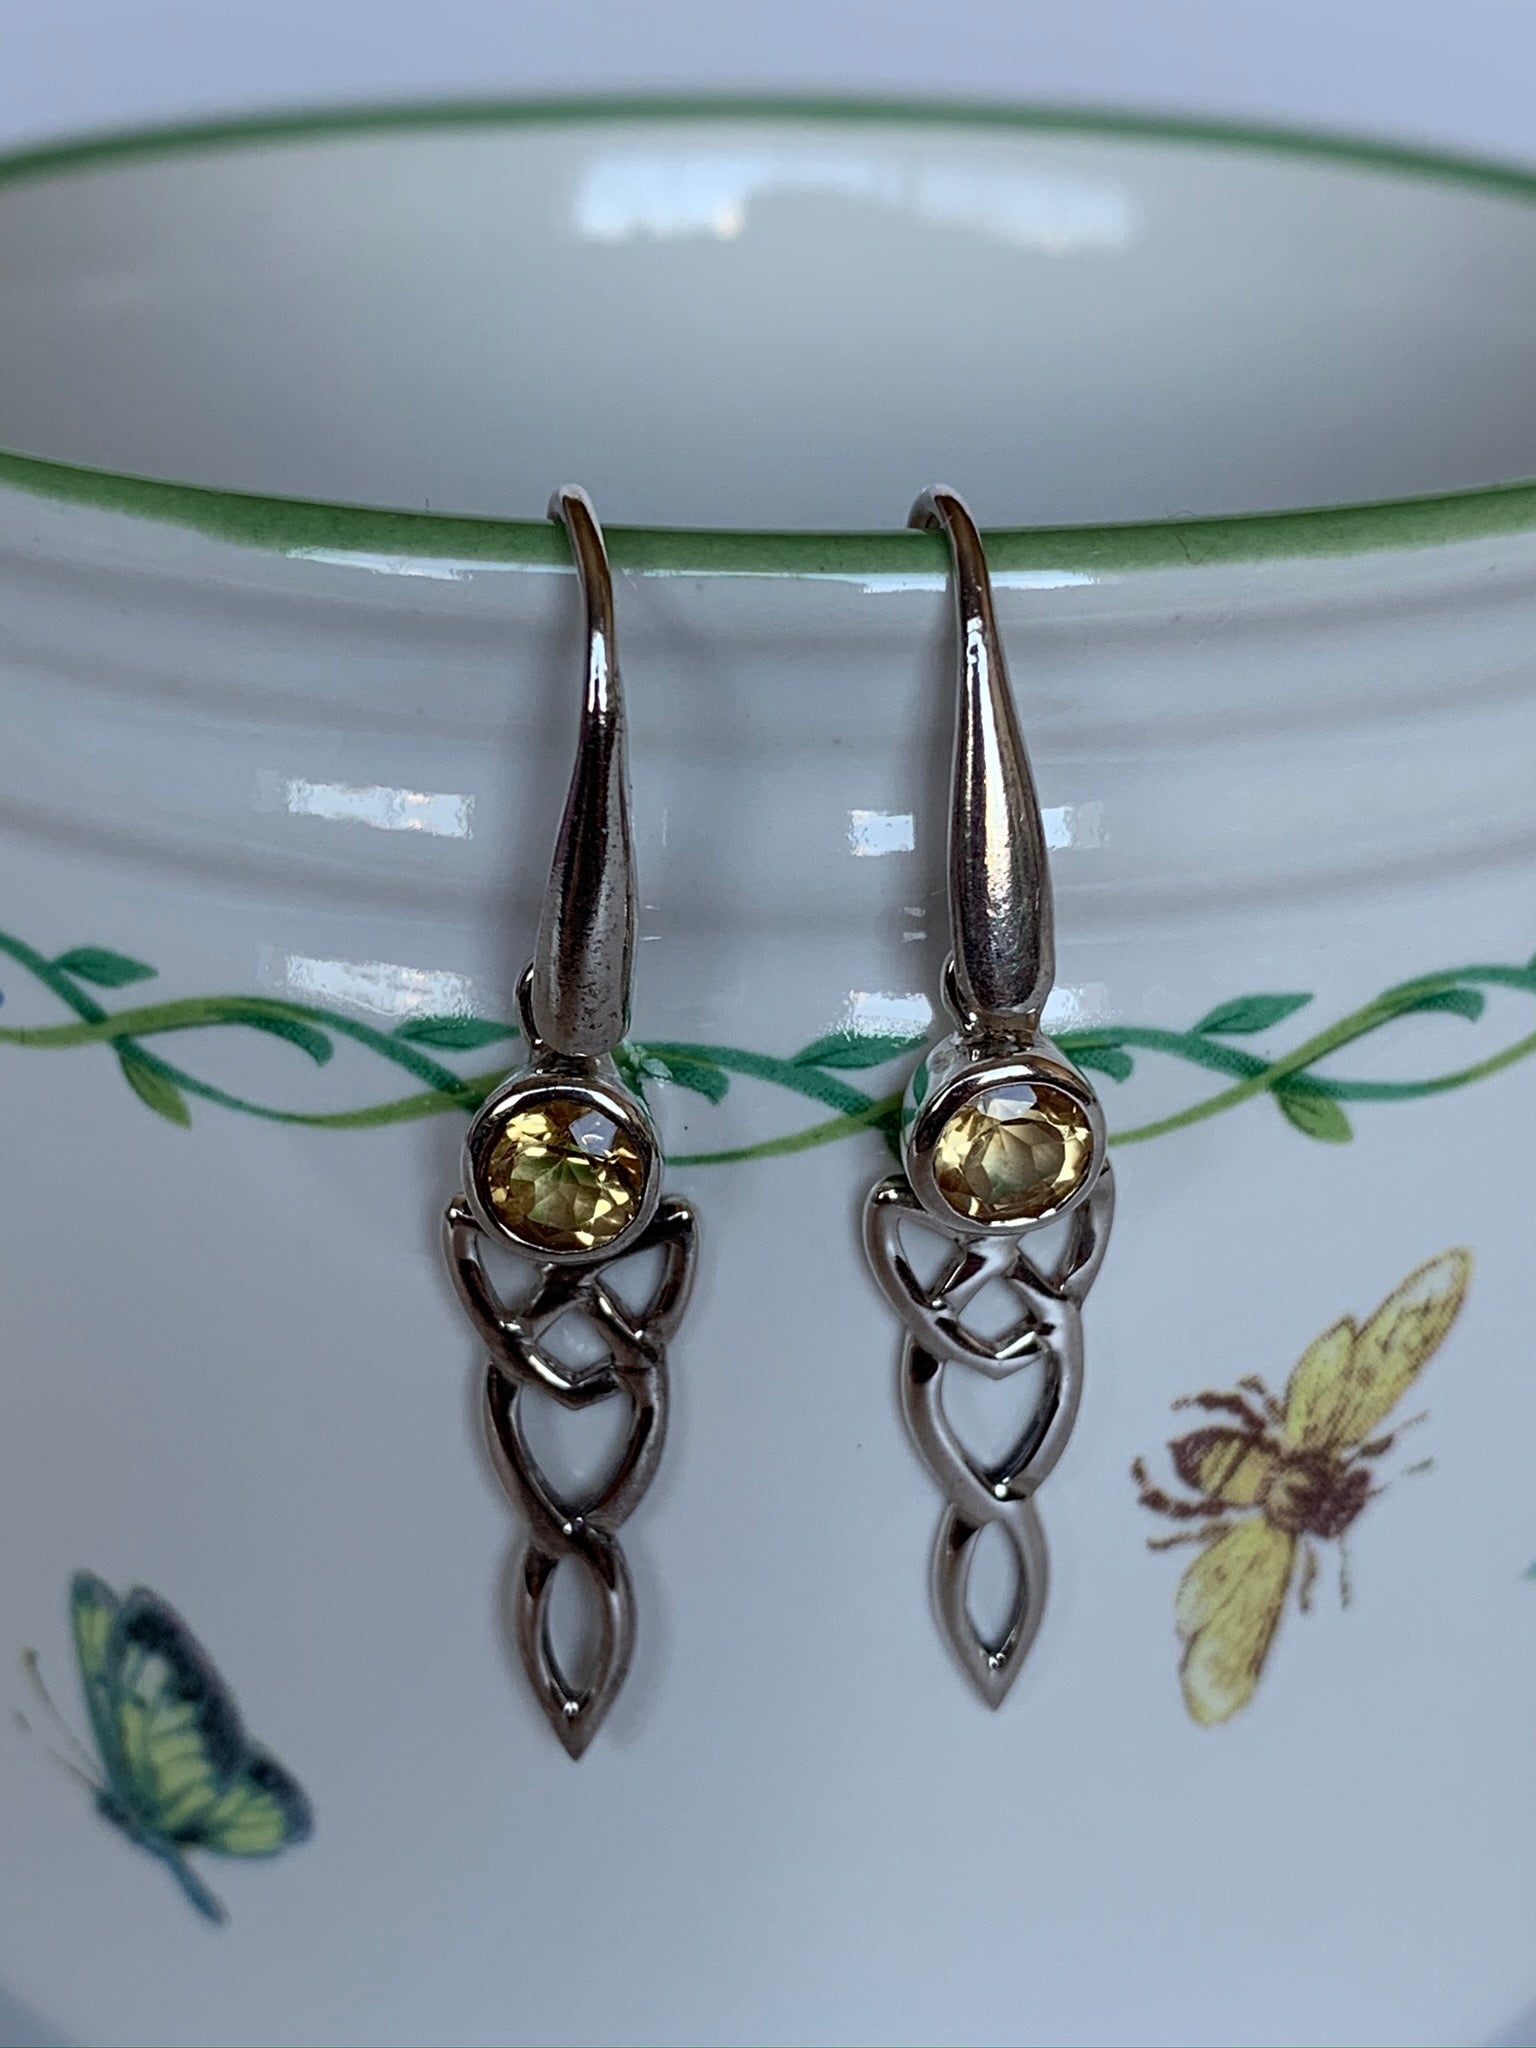 Close-up view. Round faceted citrine gemstone set in sterling silver with elongated sterling silver Celtic knot below. Wires, not posts and the wires are a bit thicker than usual. Approximately 1½" long.